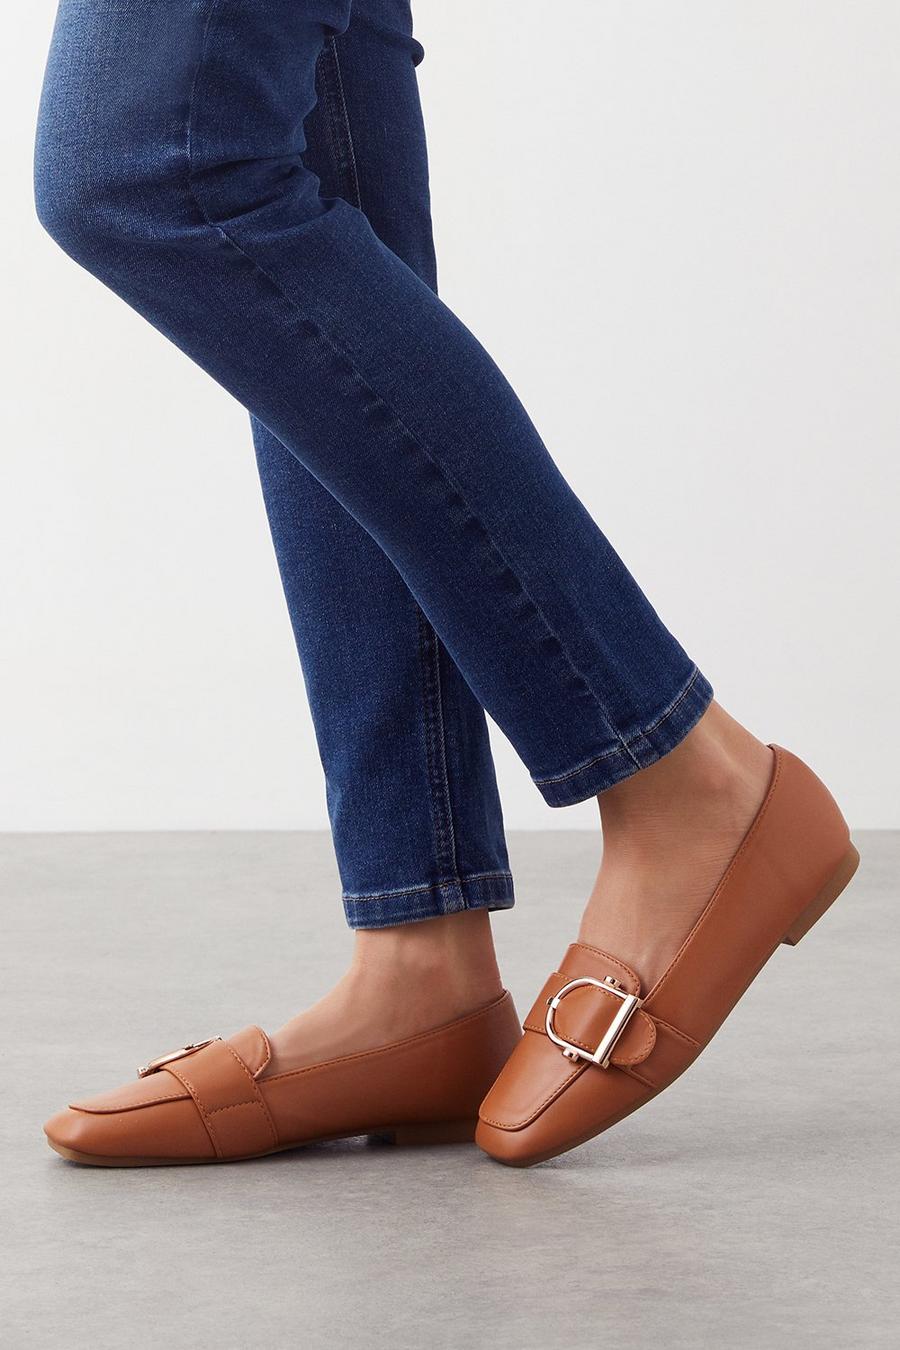 Lara Large Buckle Square Toe Loafers